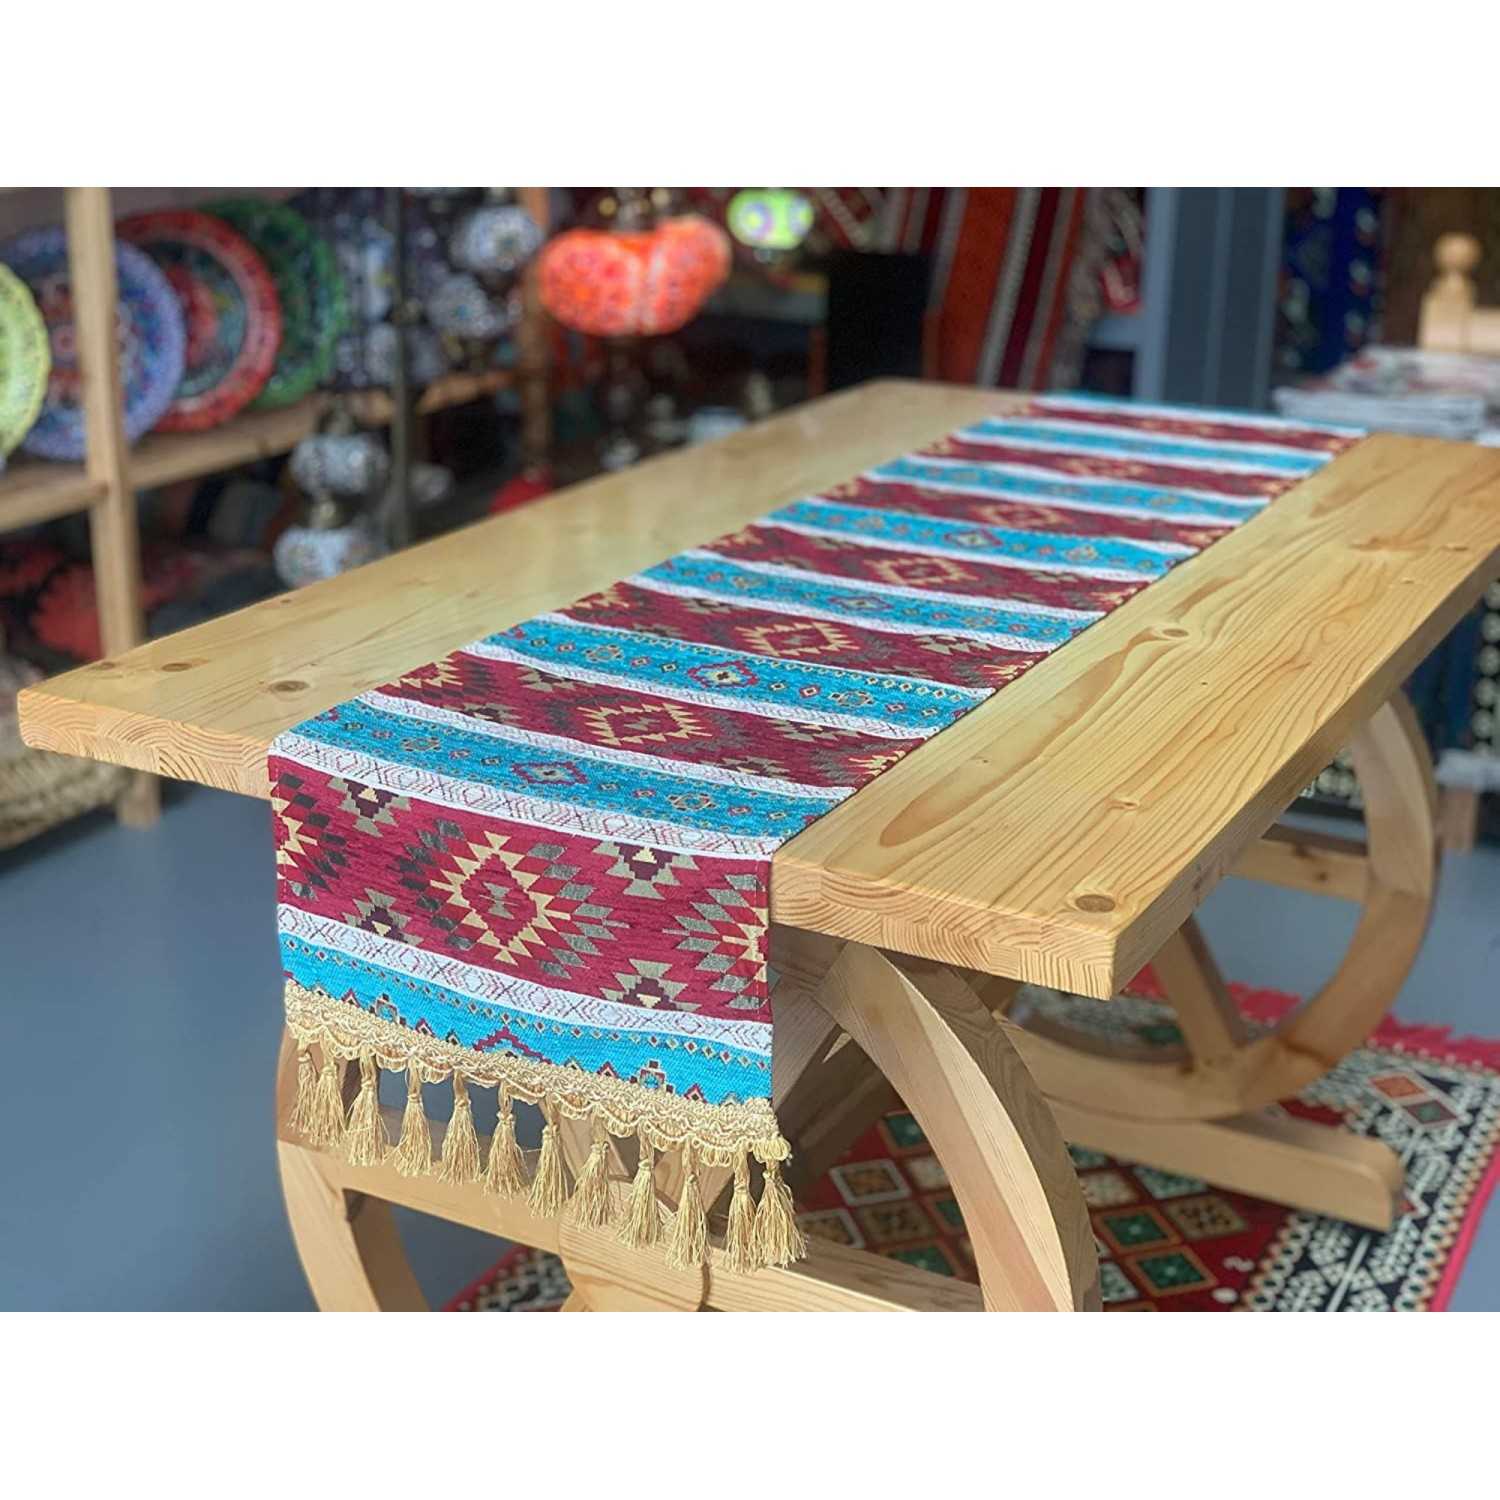 175 x 33 cm Table runner with tassels